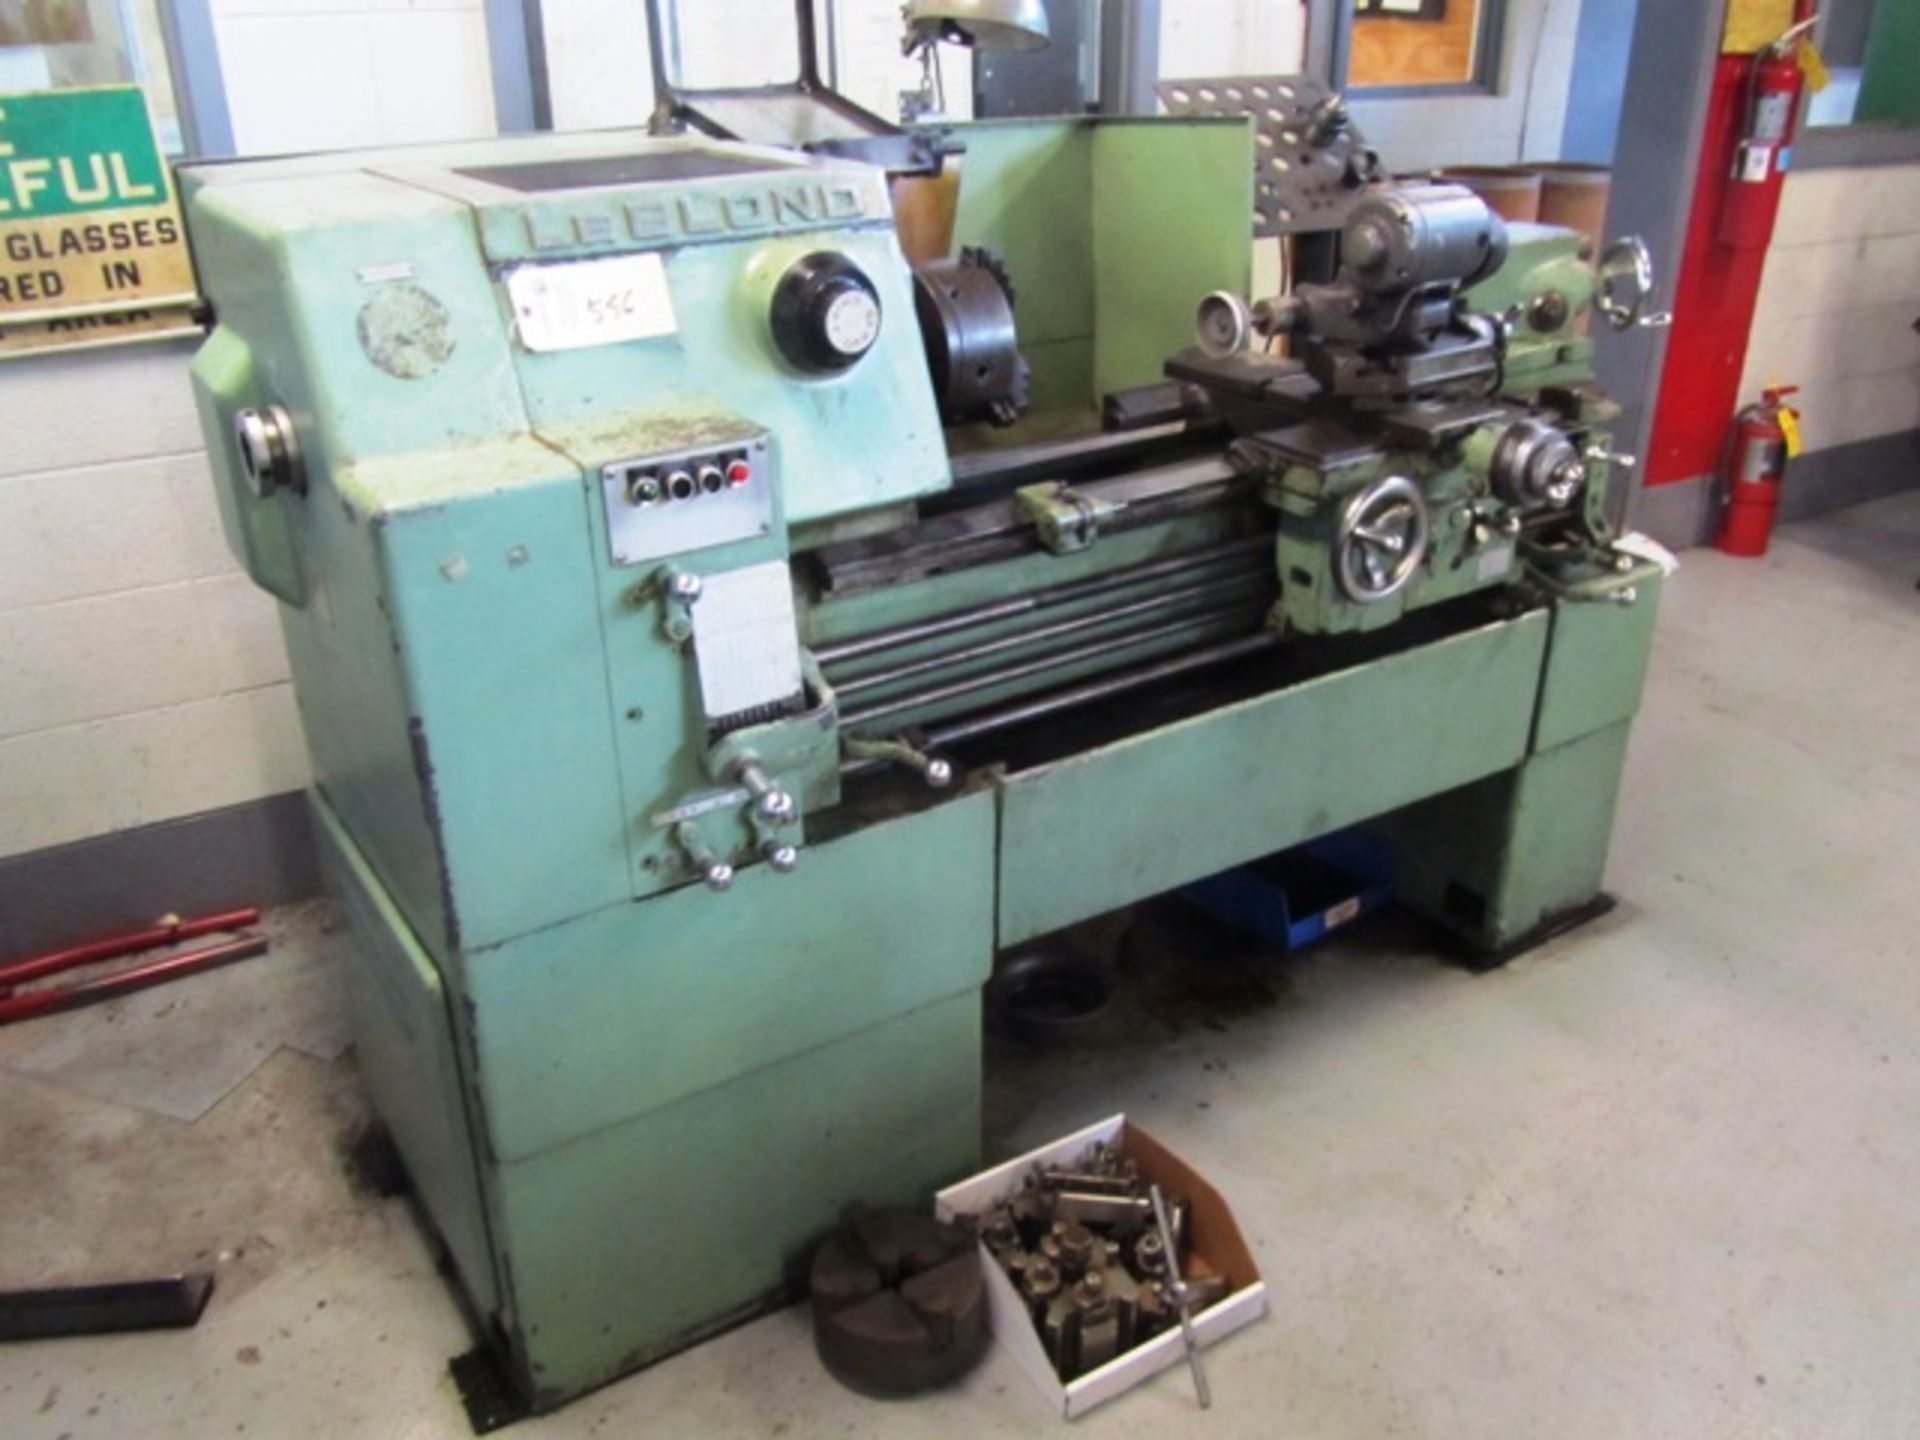 Leblonde 18'' x 36'' Toolroom Lathe with Spindle Speeds to 2400RPM, 3-Jaw & 4-Jaw Chucks, Threading, - Image 4 of 4